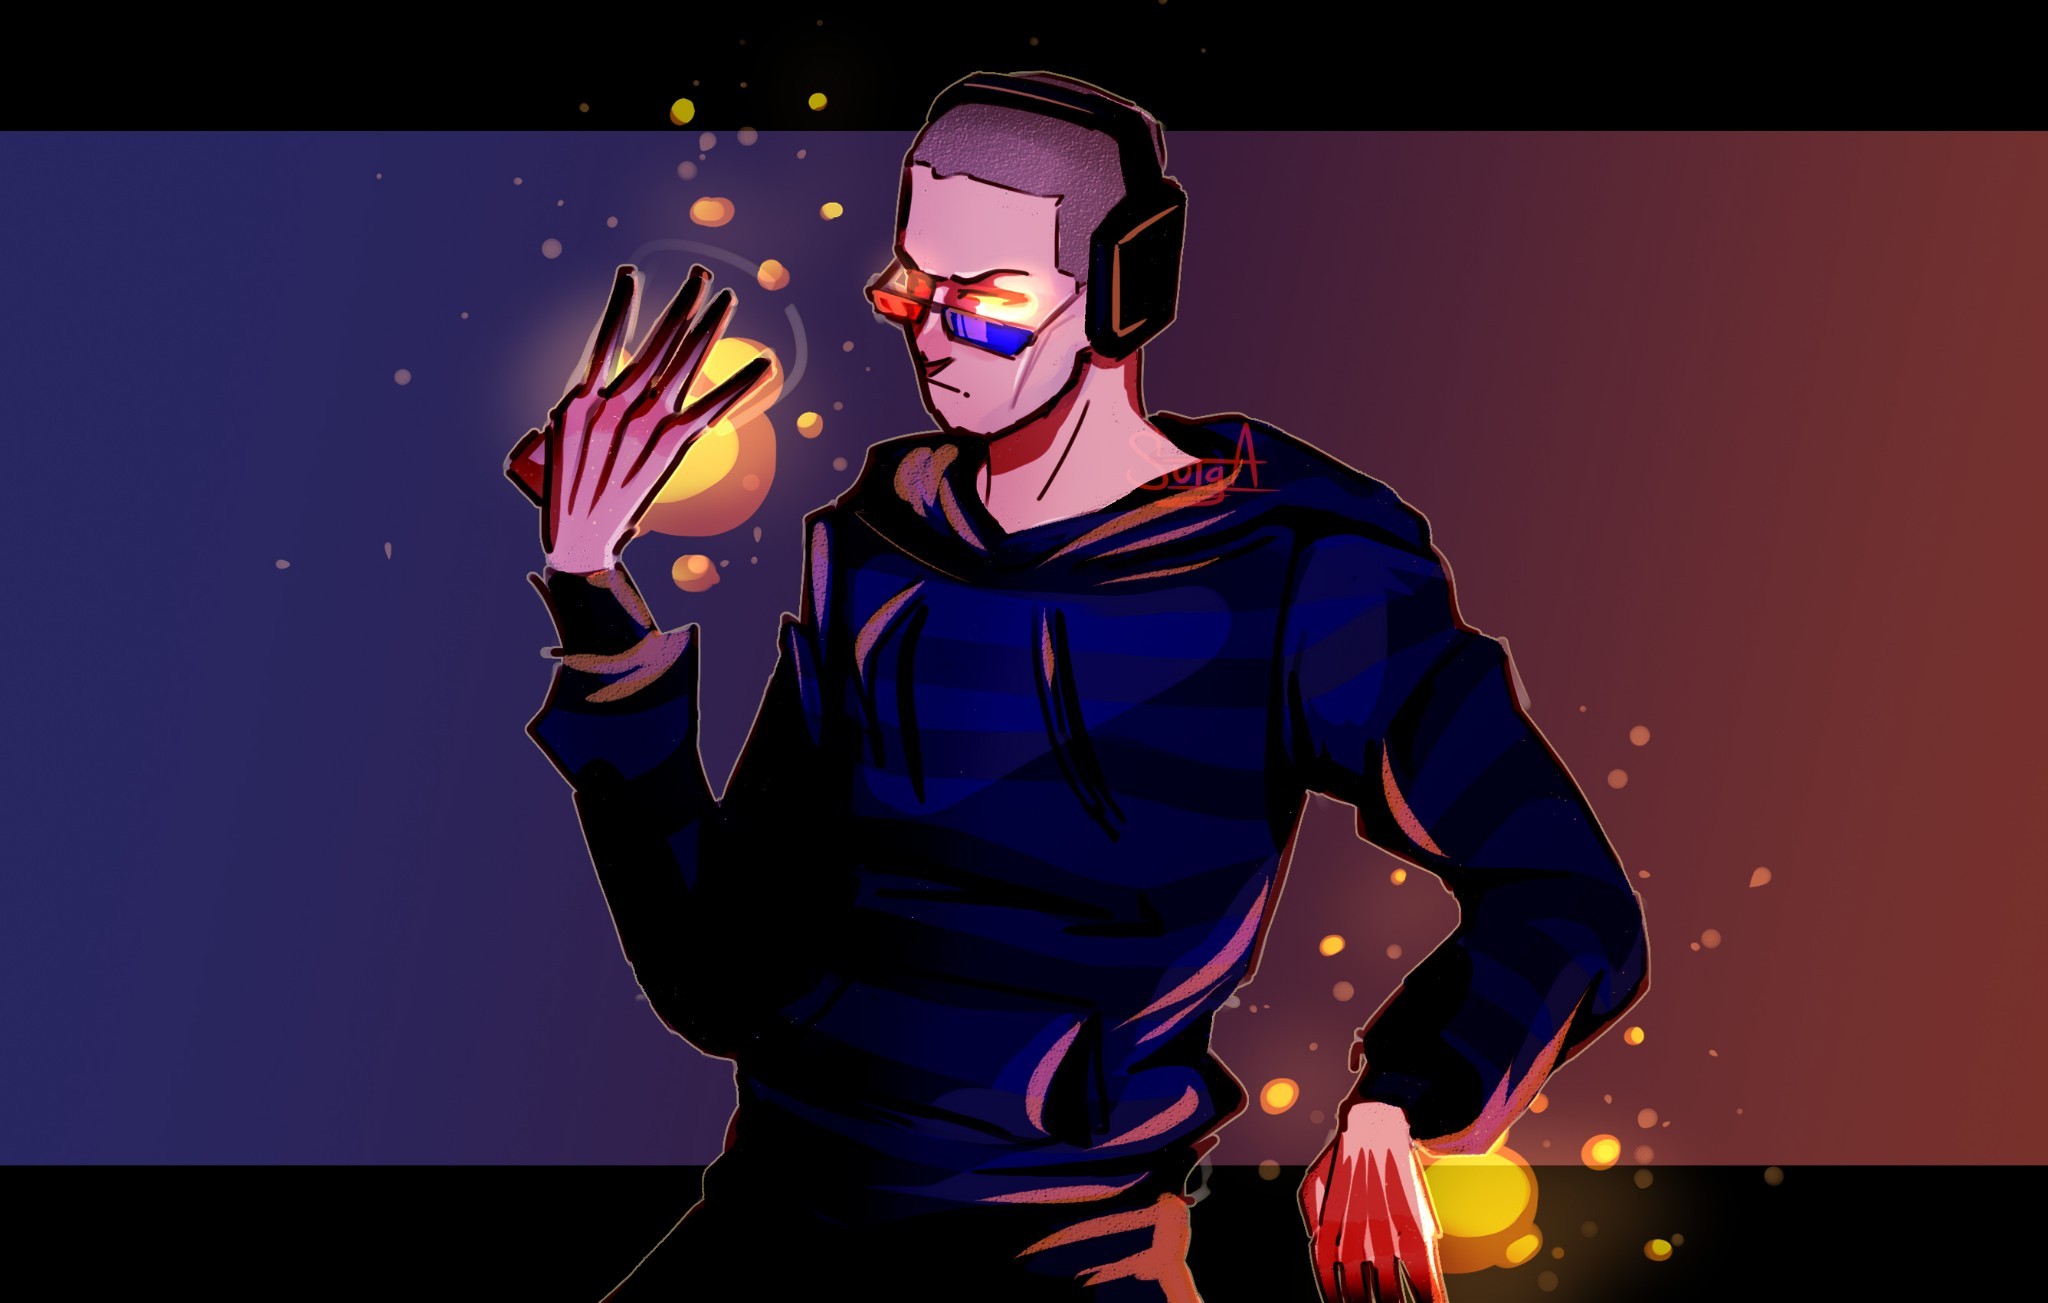 This is a drawing of Jack from the waist up. He is posed very dramatically, turning to glare at the camera. His hands are lit up with a golden light reminsicent of lava. He wears the same outfit as his skin. The background is a cool blue fading into a cool red.